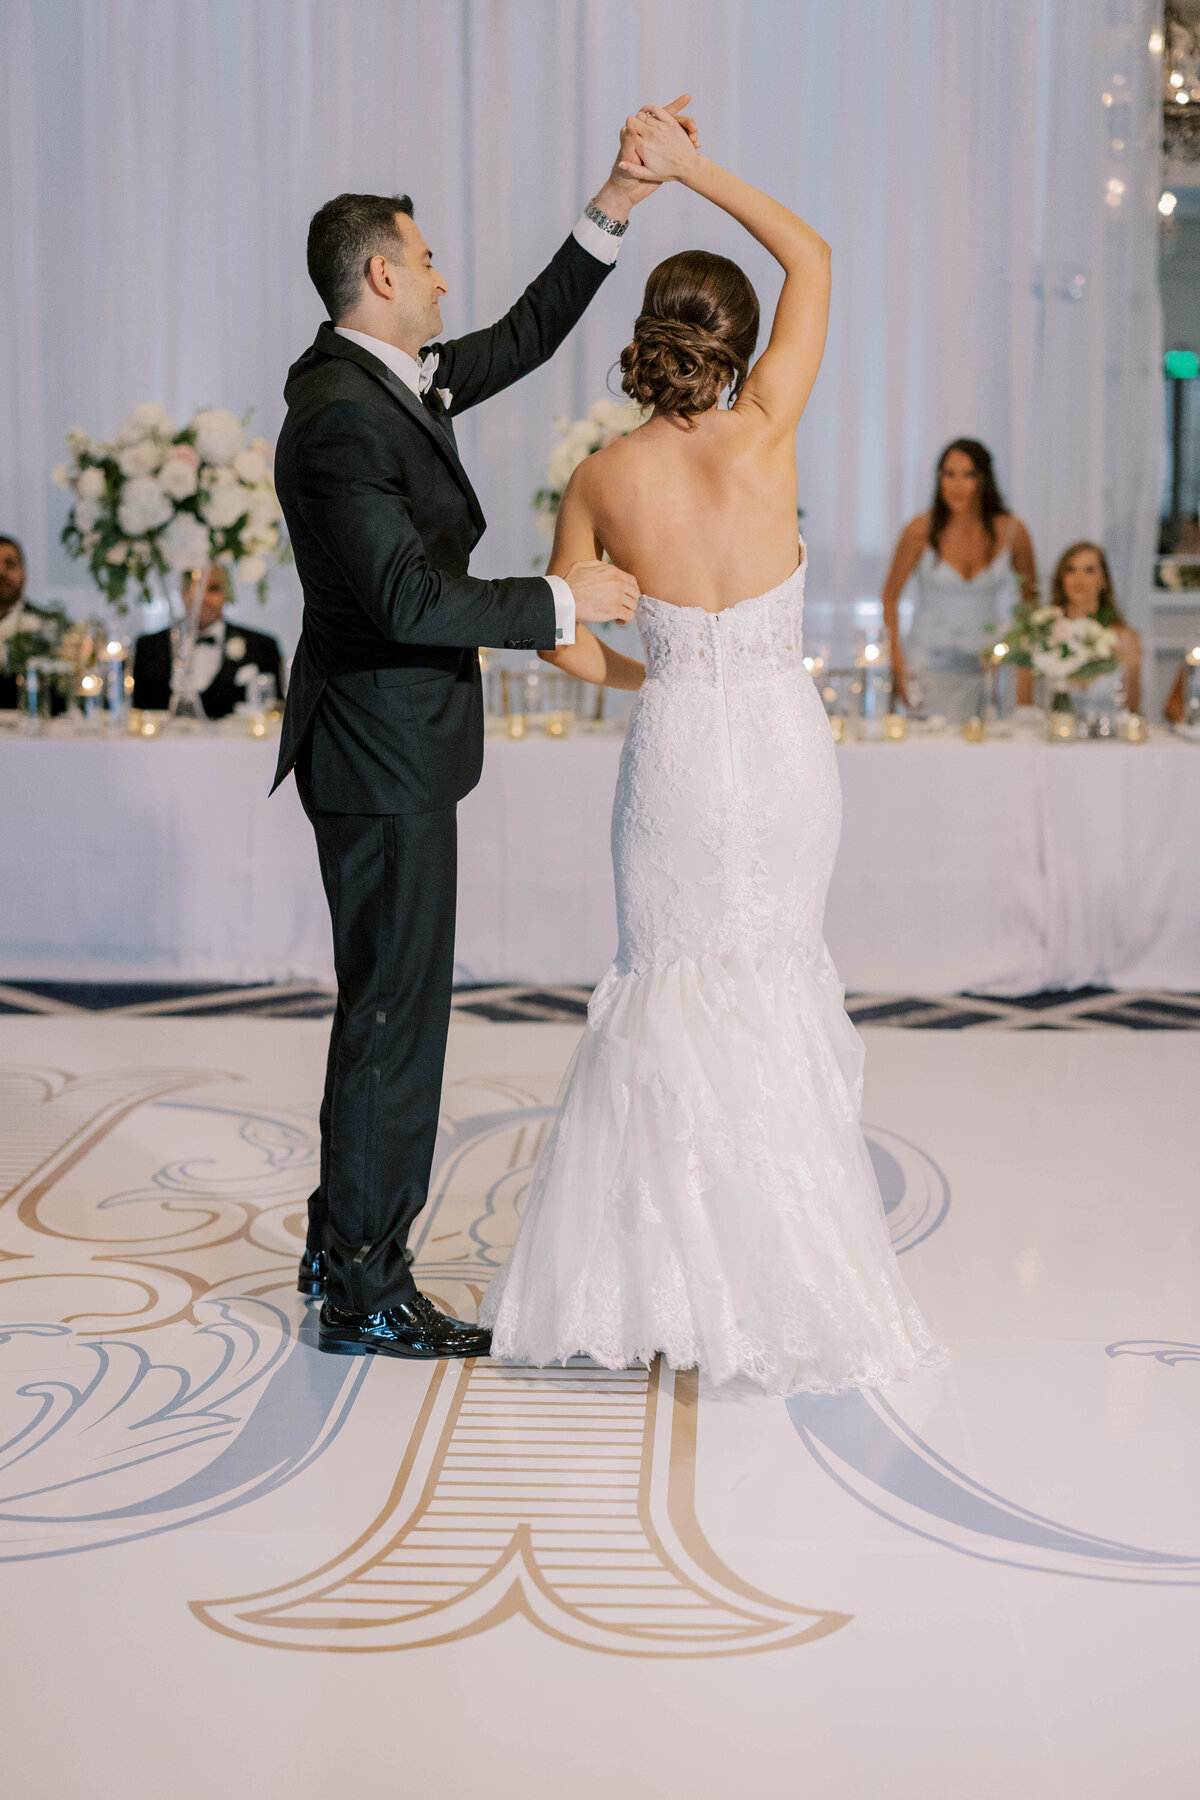 A Wedding at the Omni Mandalay in Irving, Texas - 43